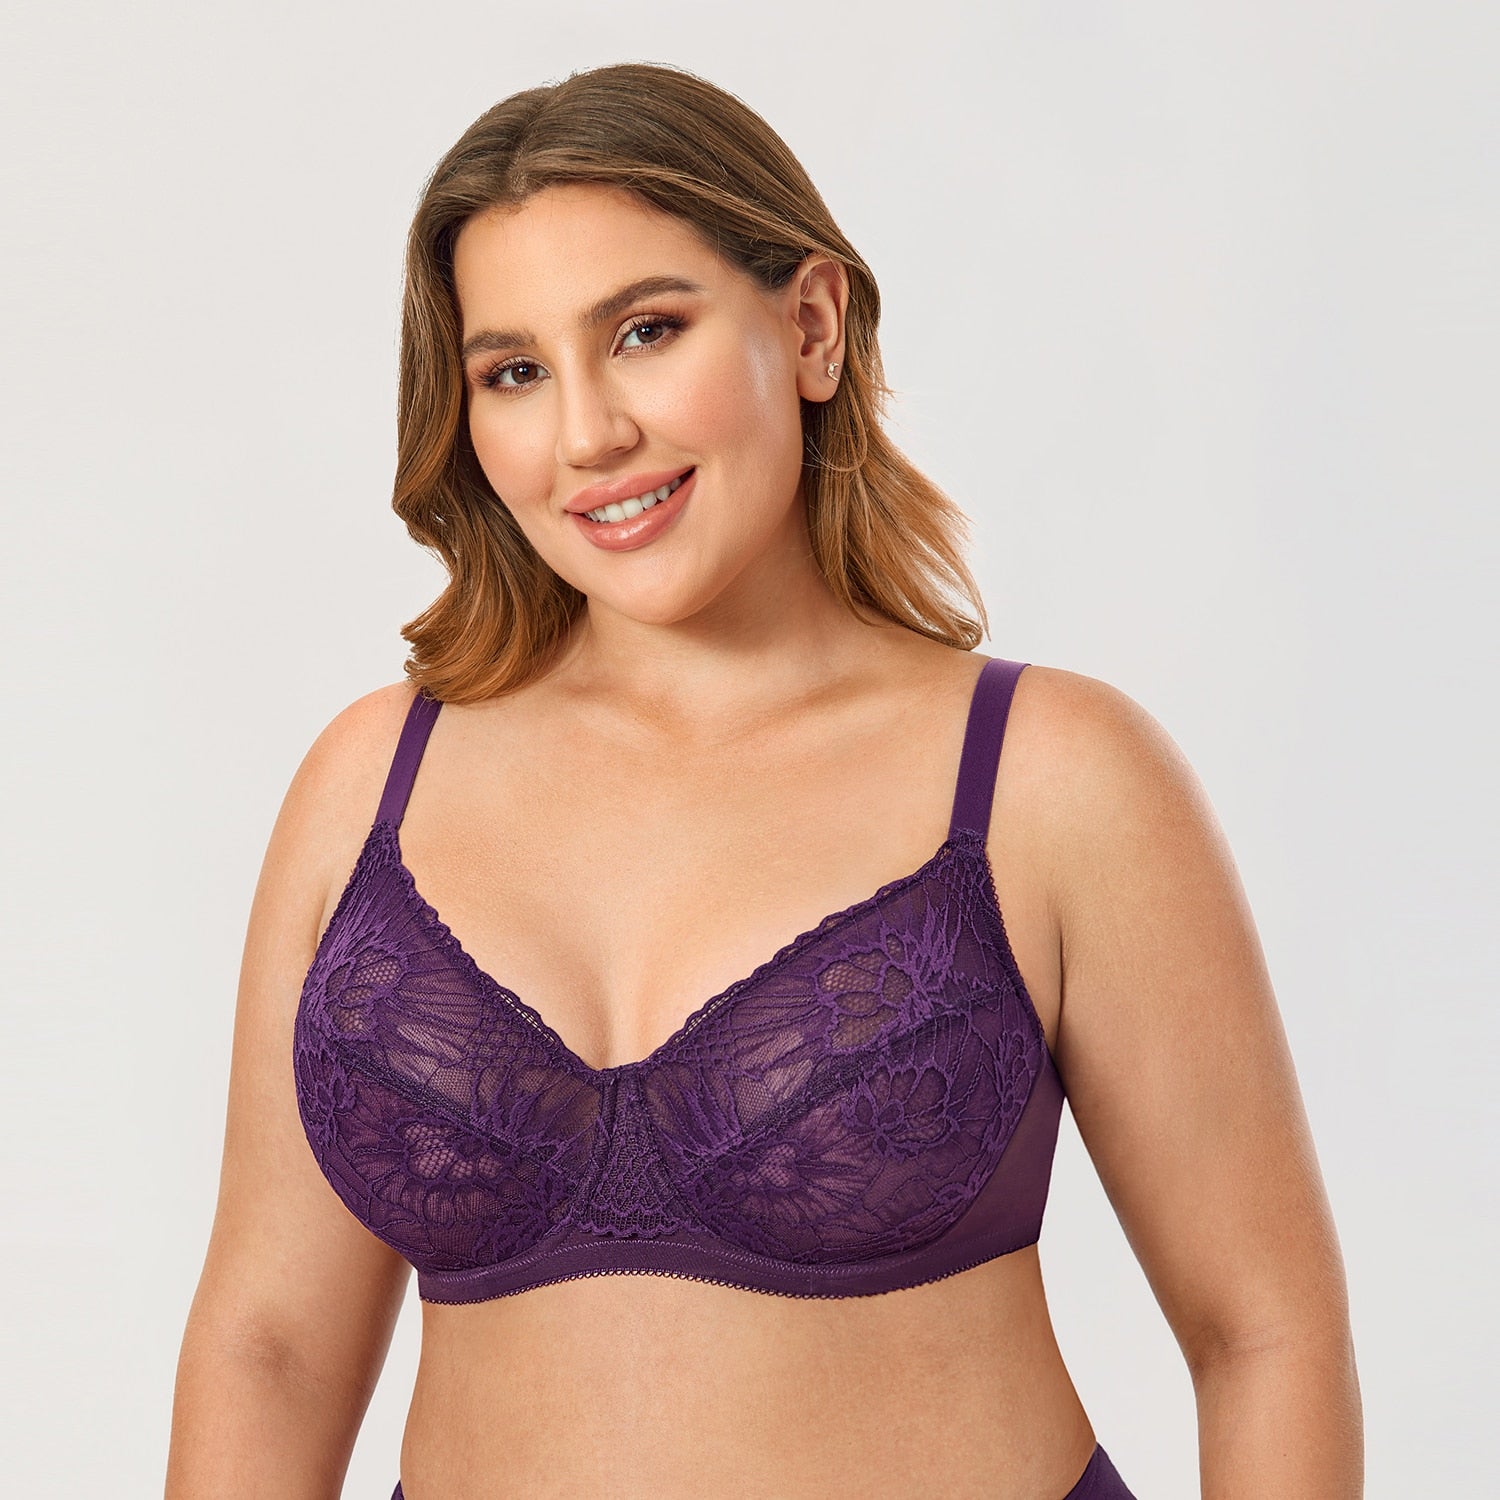 Plus size underwired full cup lace bra (Size 32/75 - 44/100, C - G